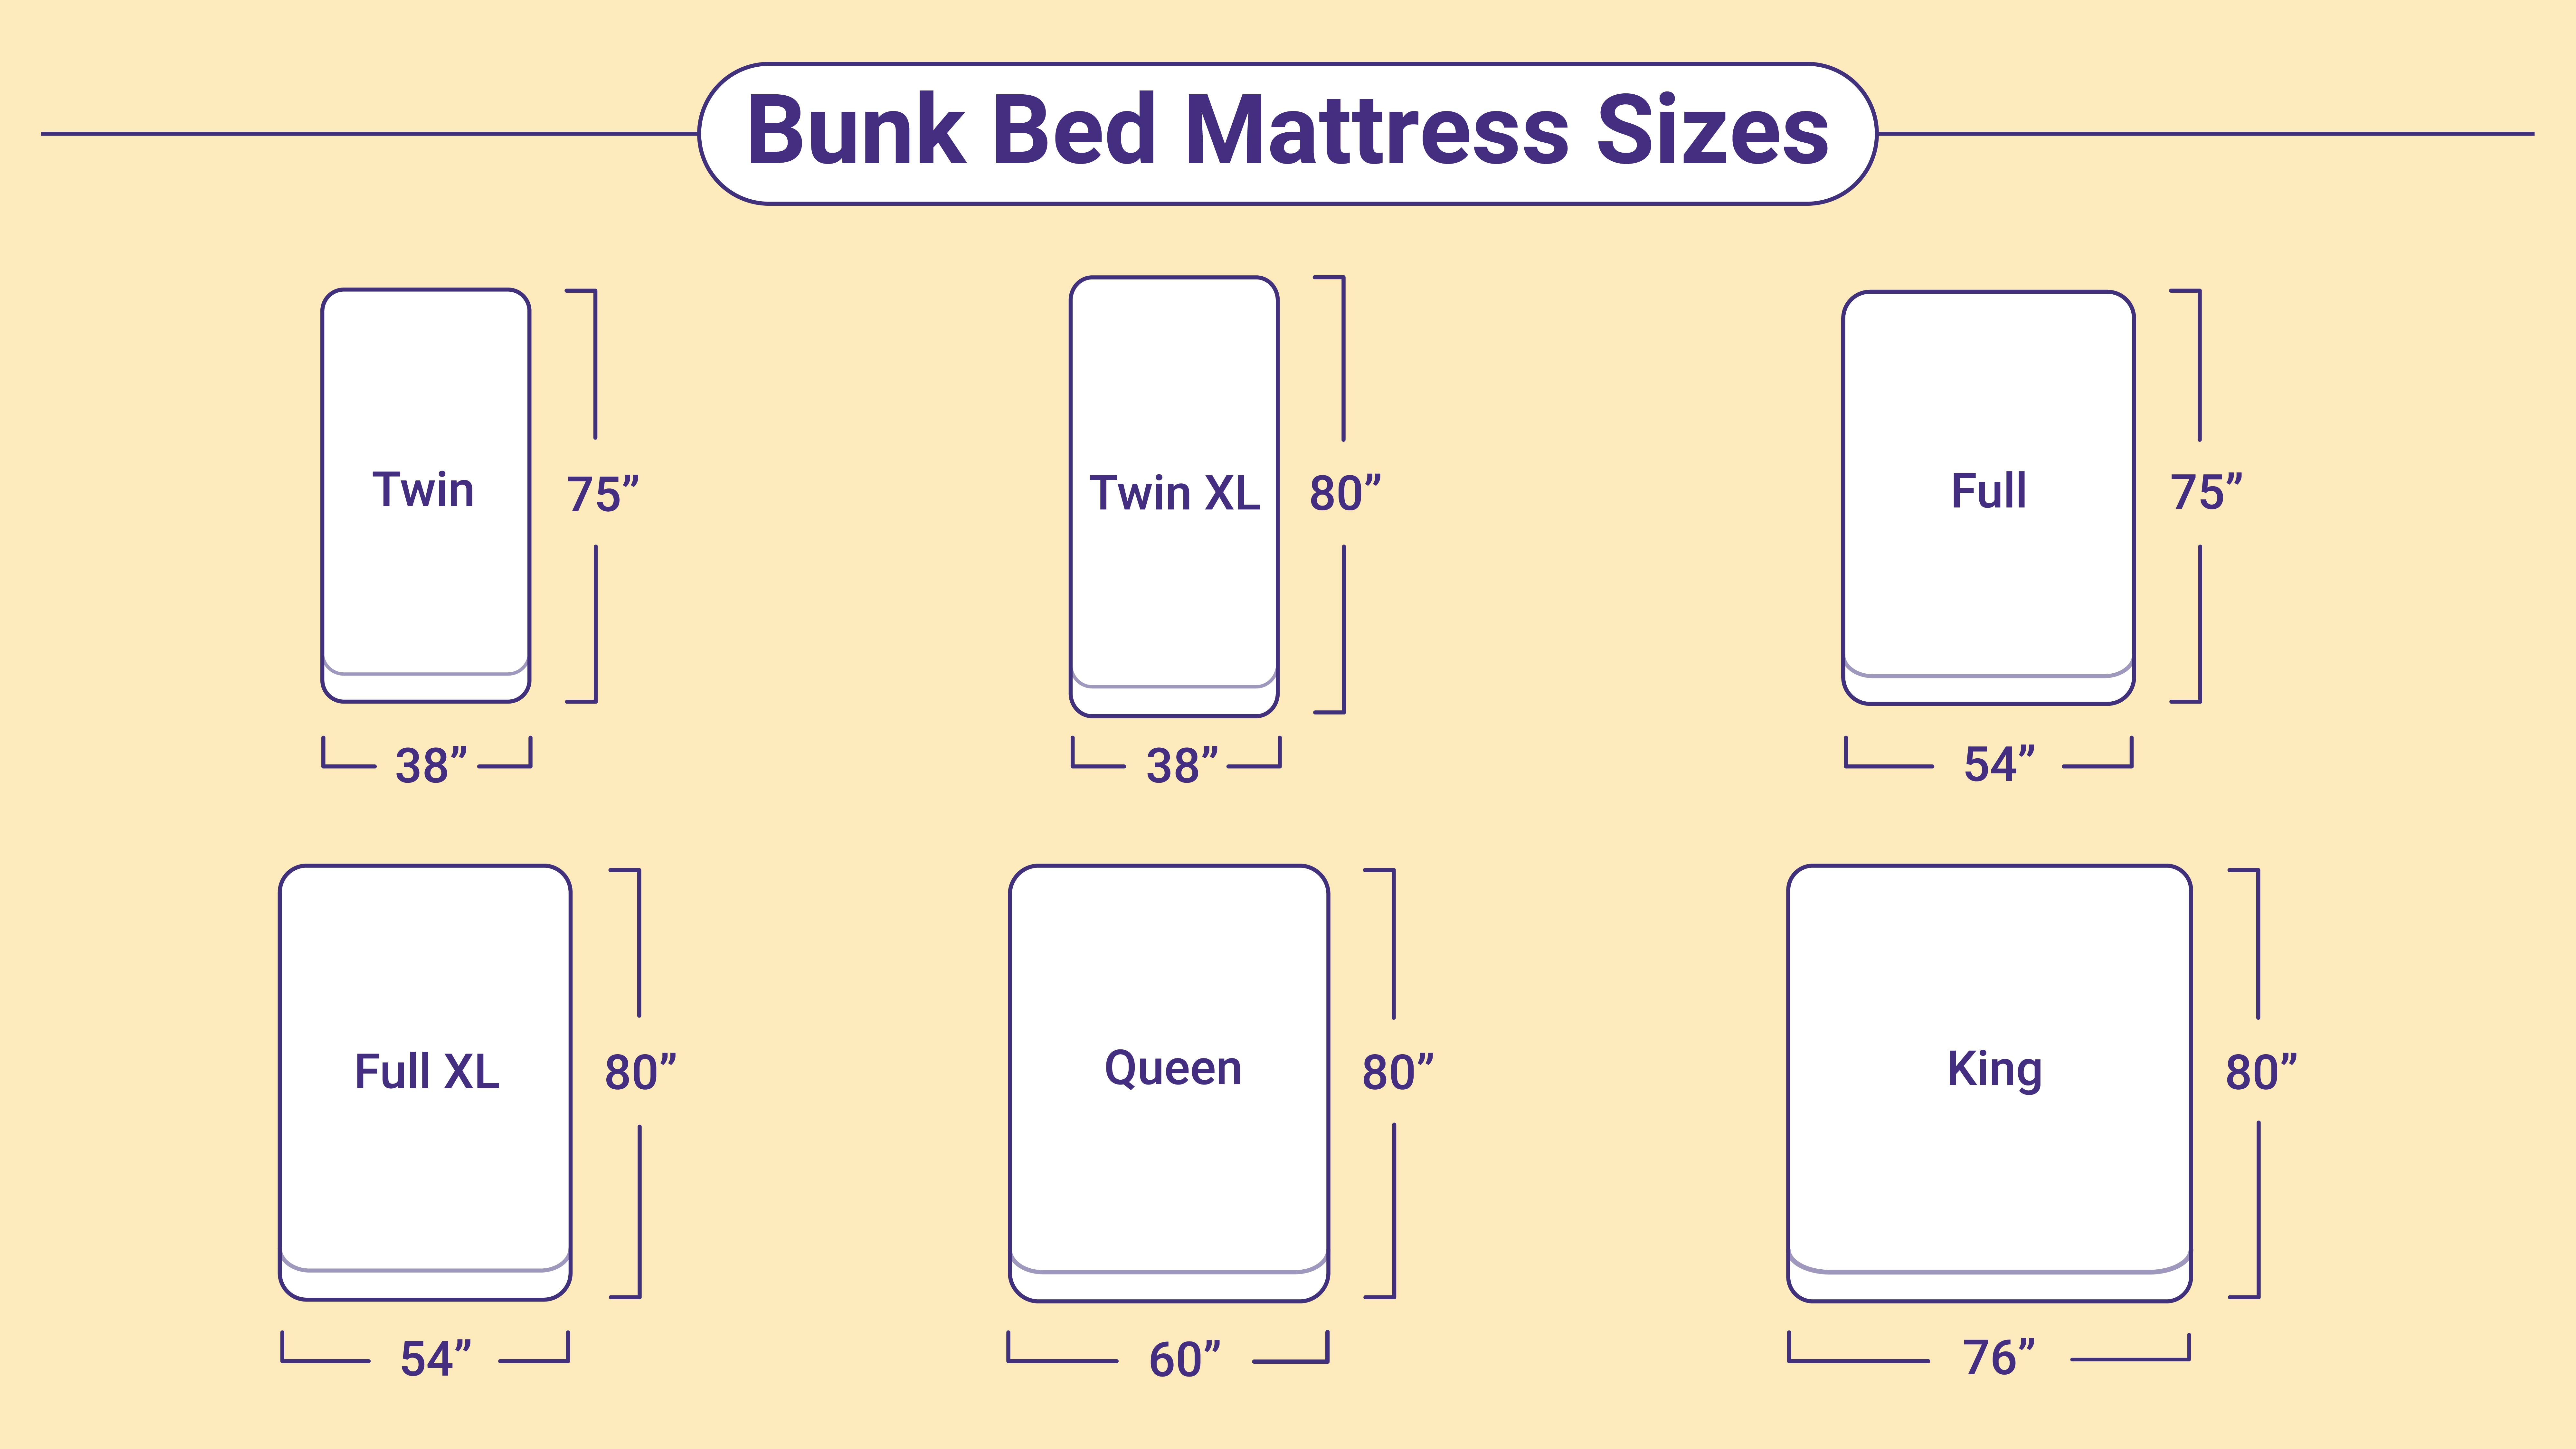 Bunk Bed Mattress Sizes And Dimensions, 6 Inch Twin Mattress For Bunk Bed